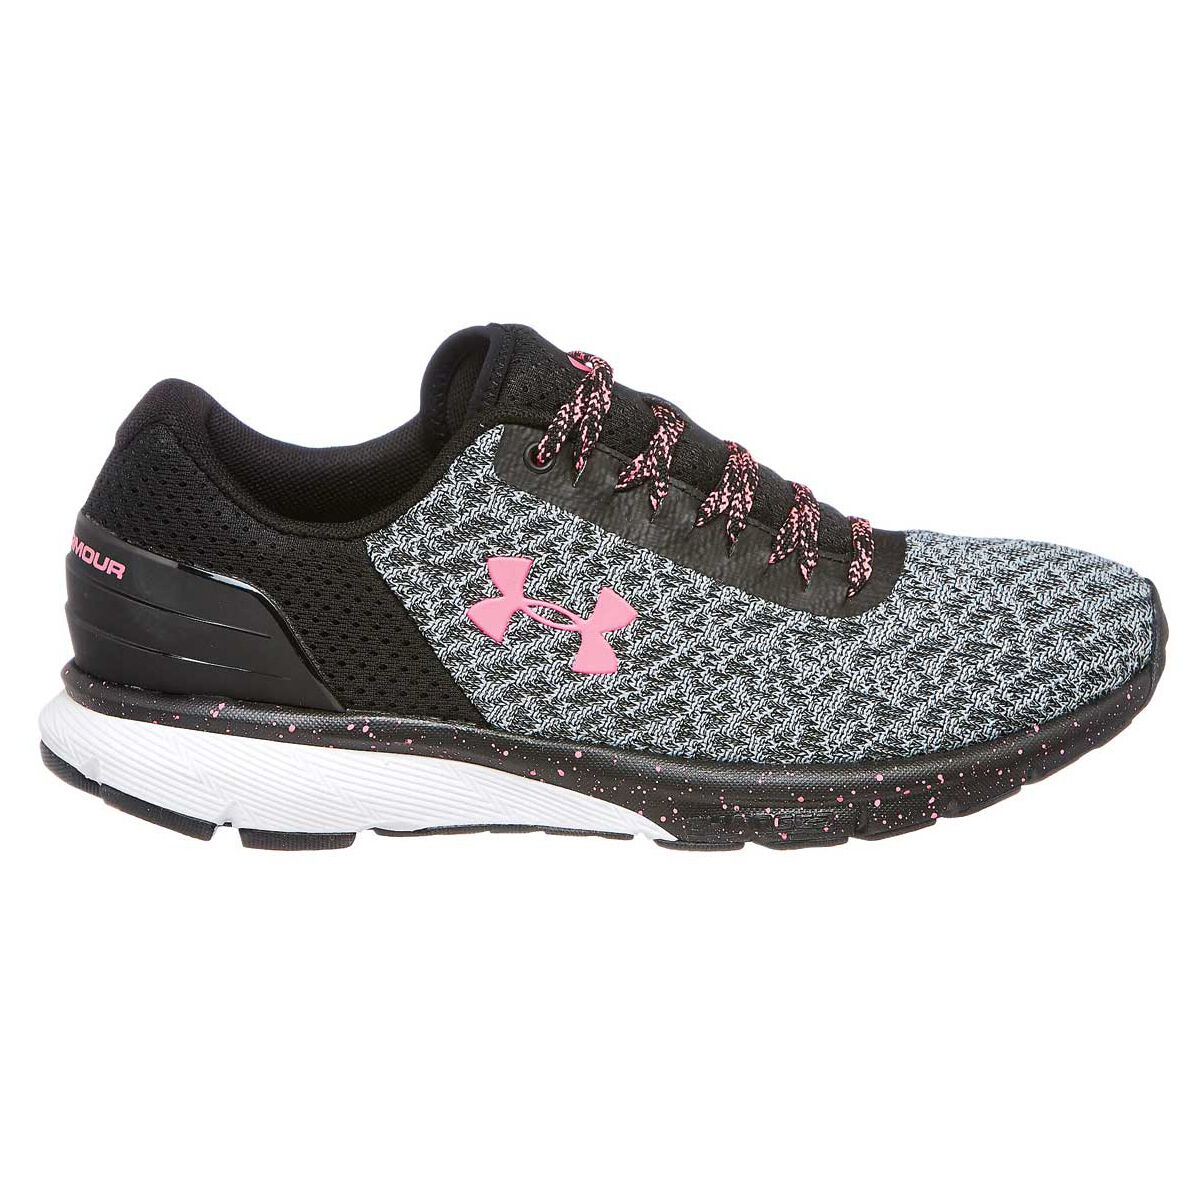 under armour women's charged escape 2 running shoe